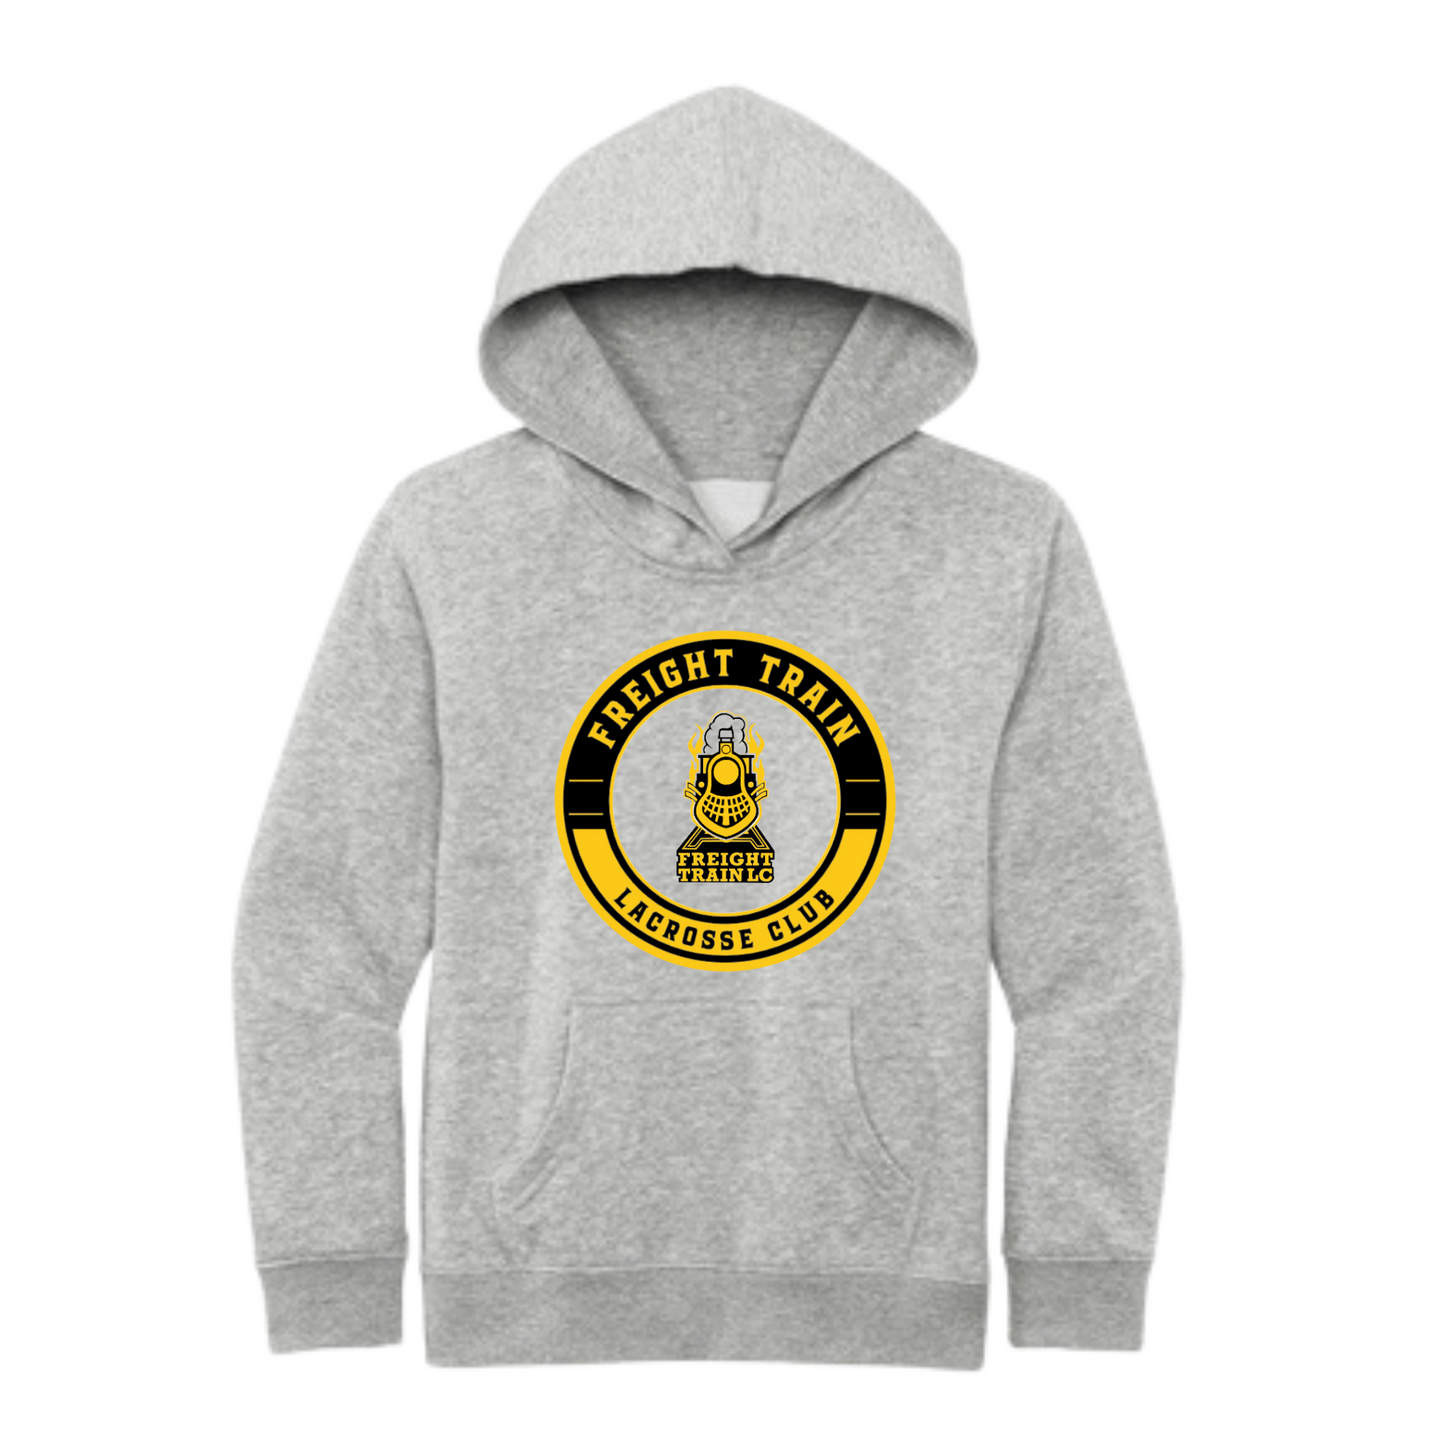 FREIGHT TRAIN LACROSSE CLUB CIRCLE LOGO YOUTH HOODIE - LIGHT HEATHER GRAY